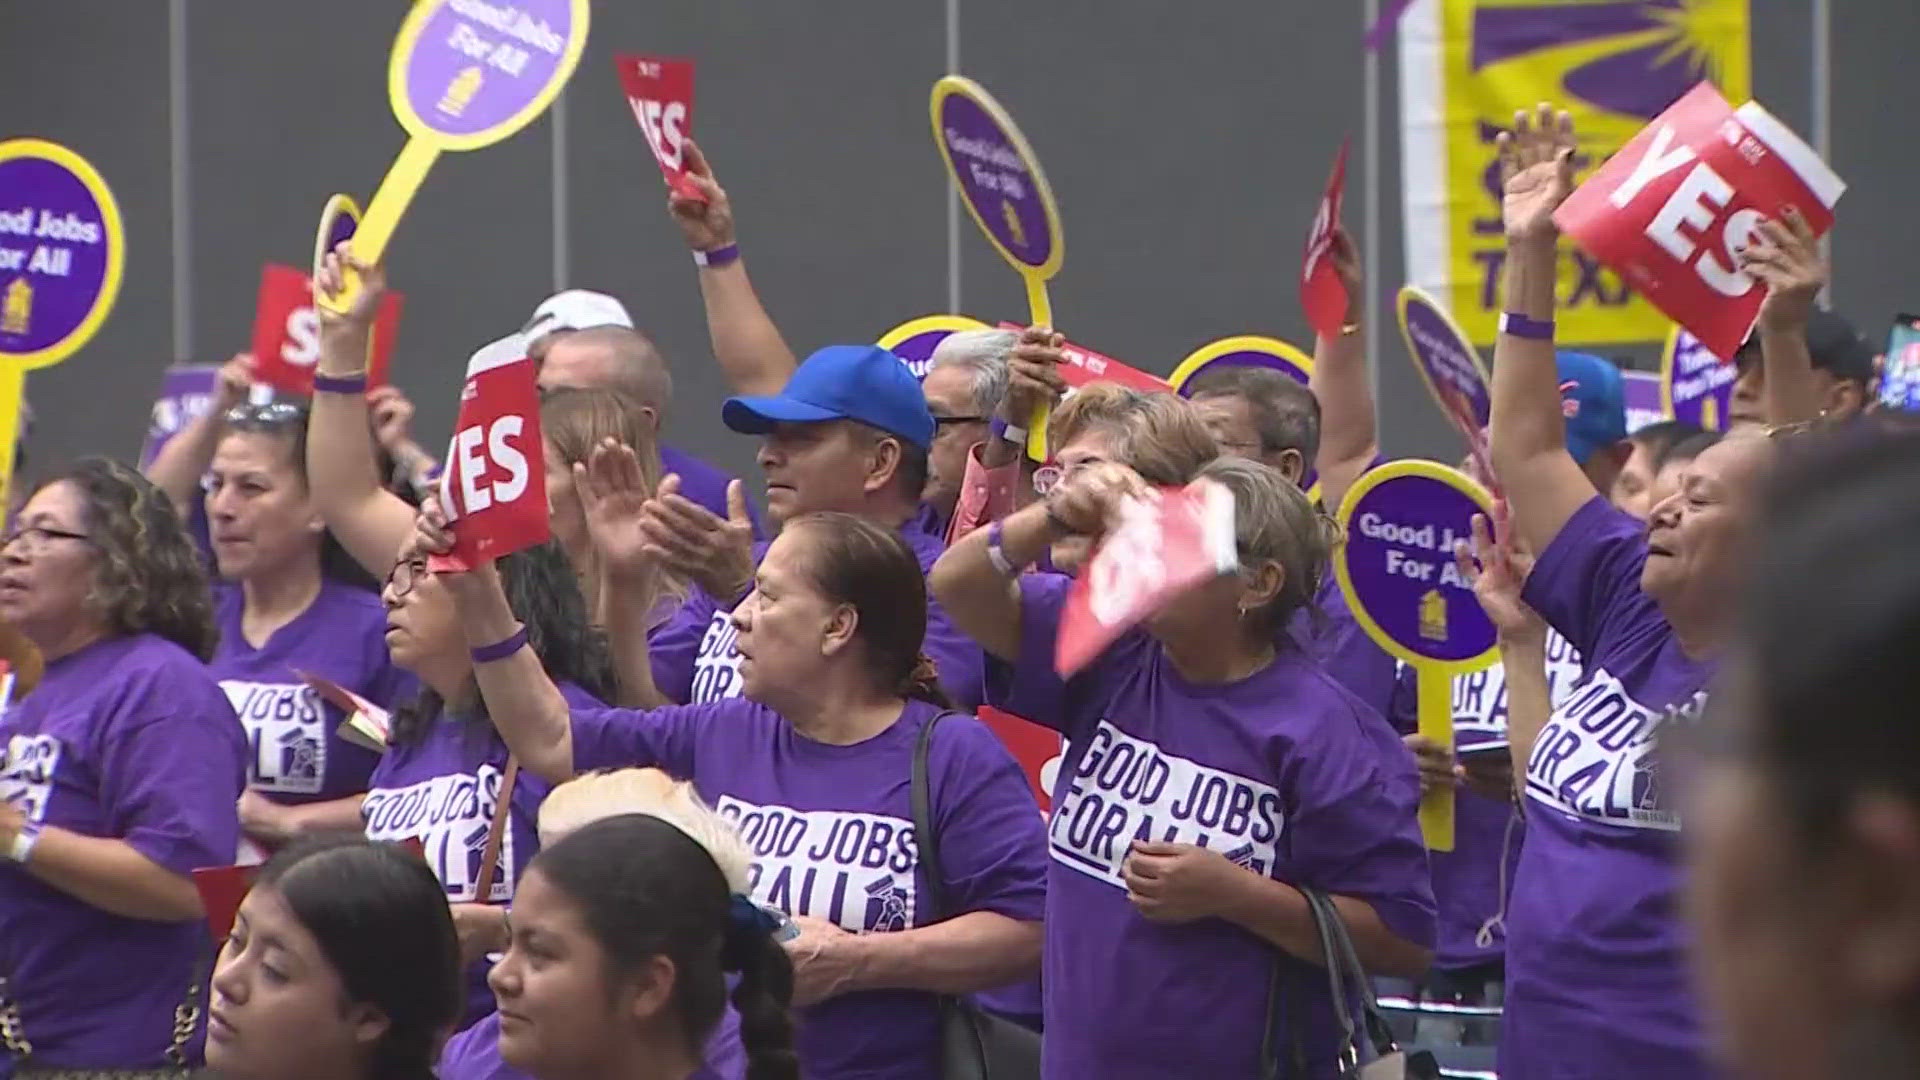 Hundreds of Houston janitors are demanding better pay, more benefits and more hours. They say they’ve gone on strike before and are prepared to do so again.